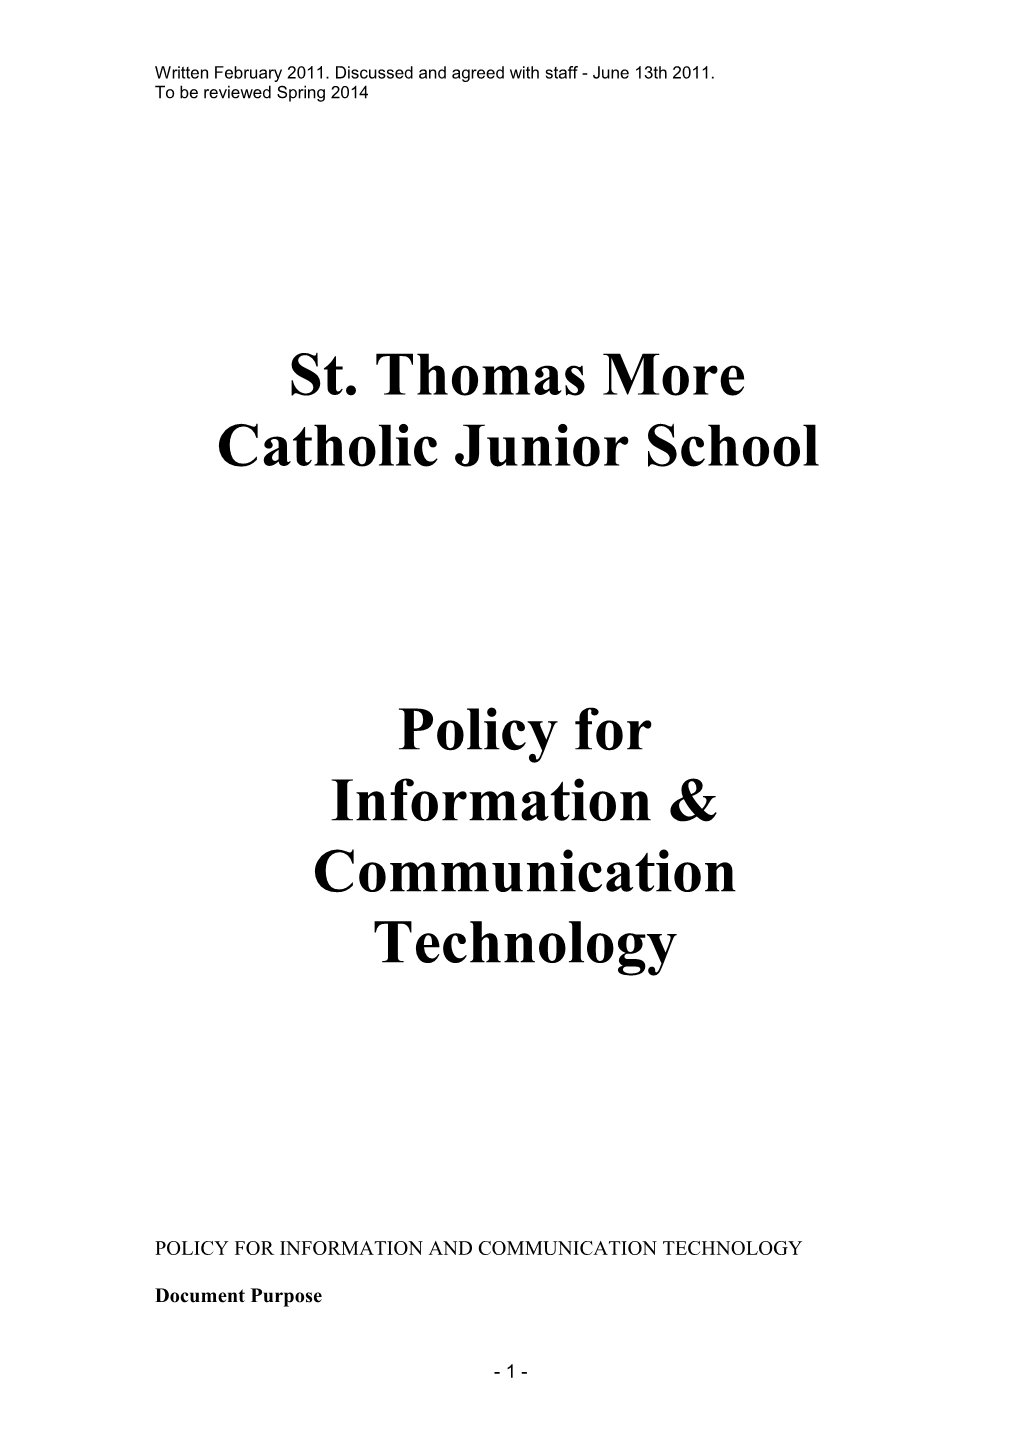 Lnformation Technology Policy